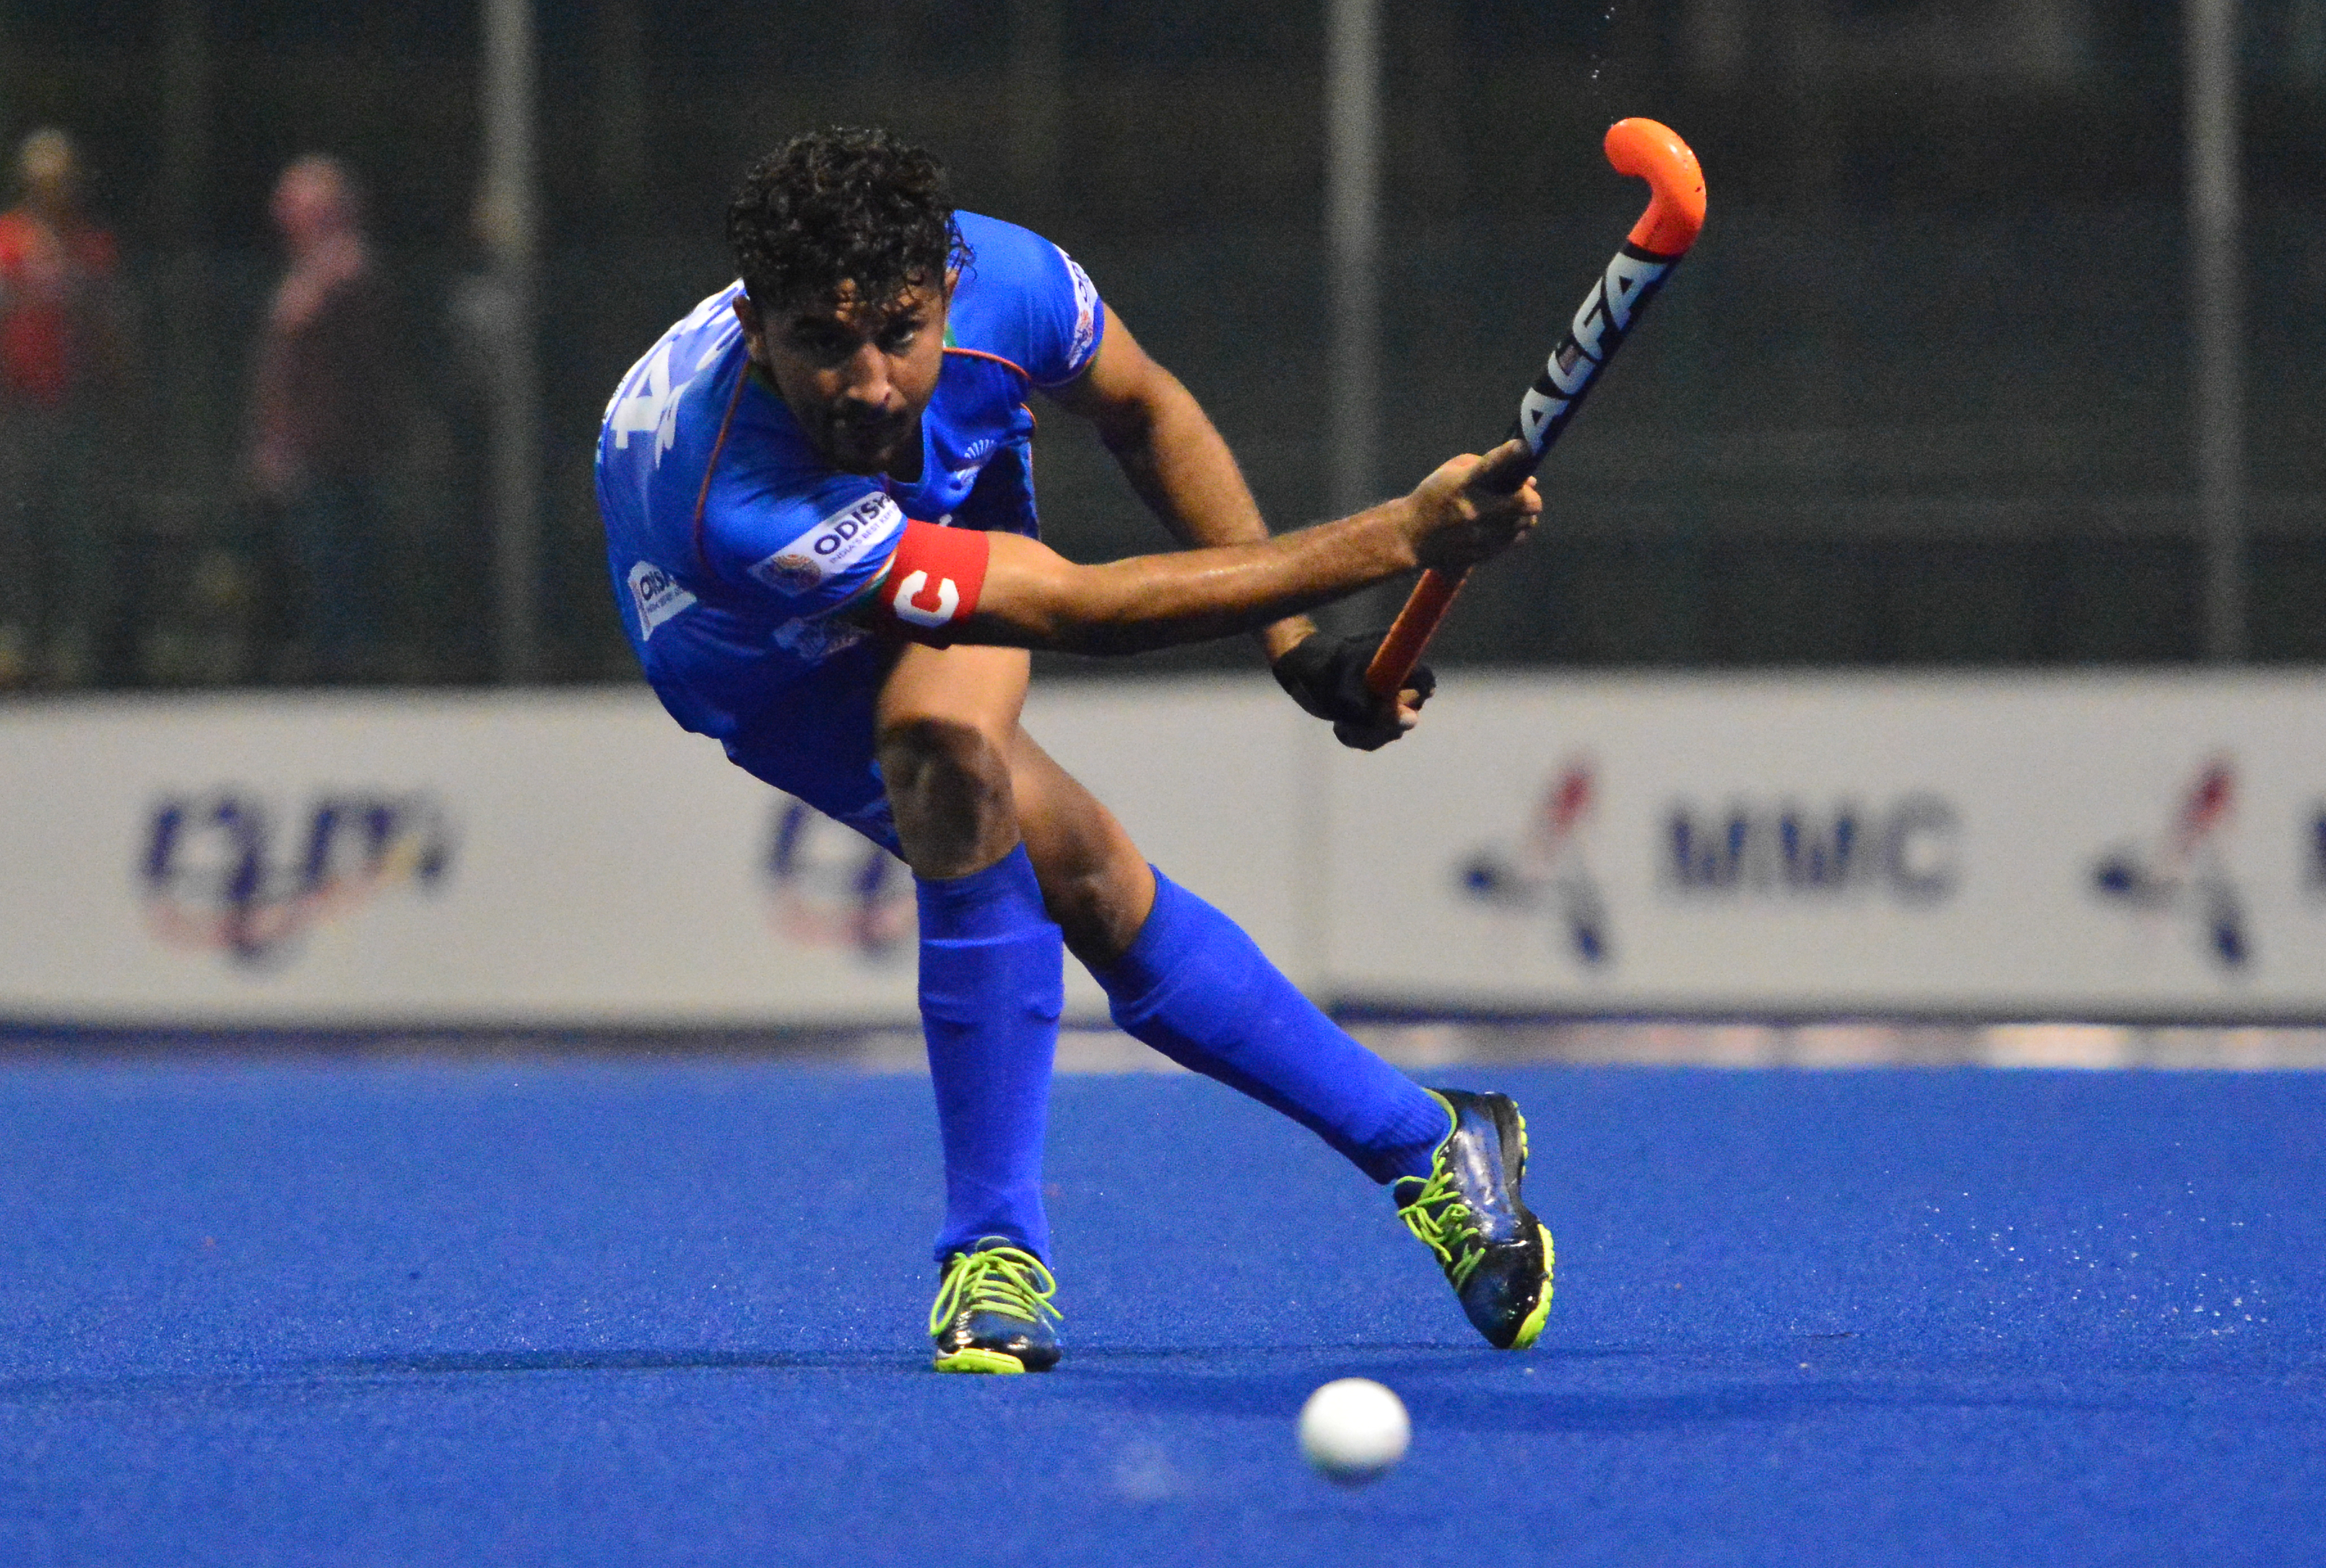 Sultan of Johor Cup | India lose 3-4 to Japan in thriller